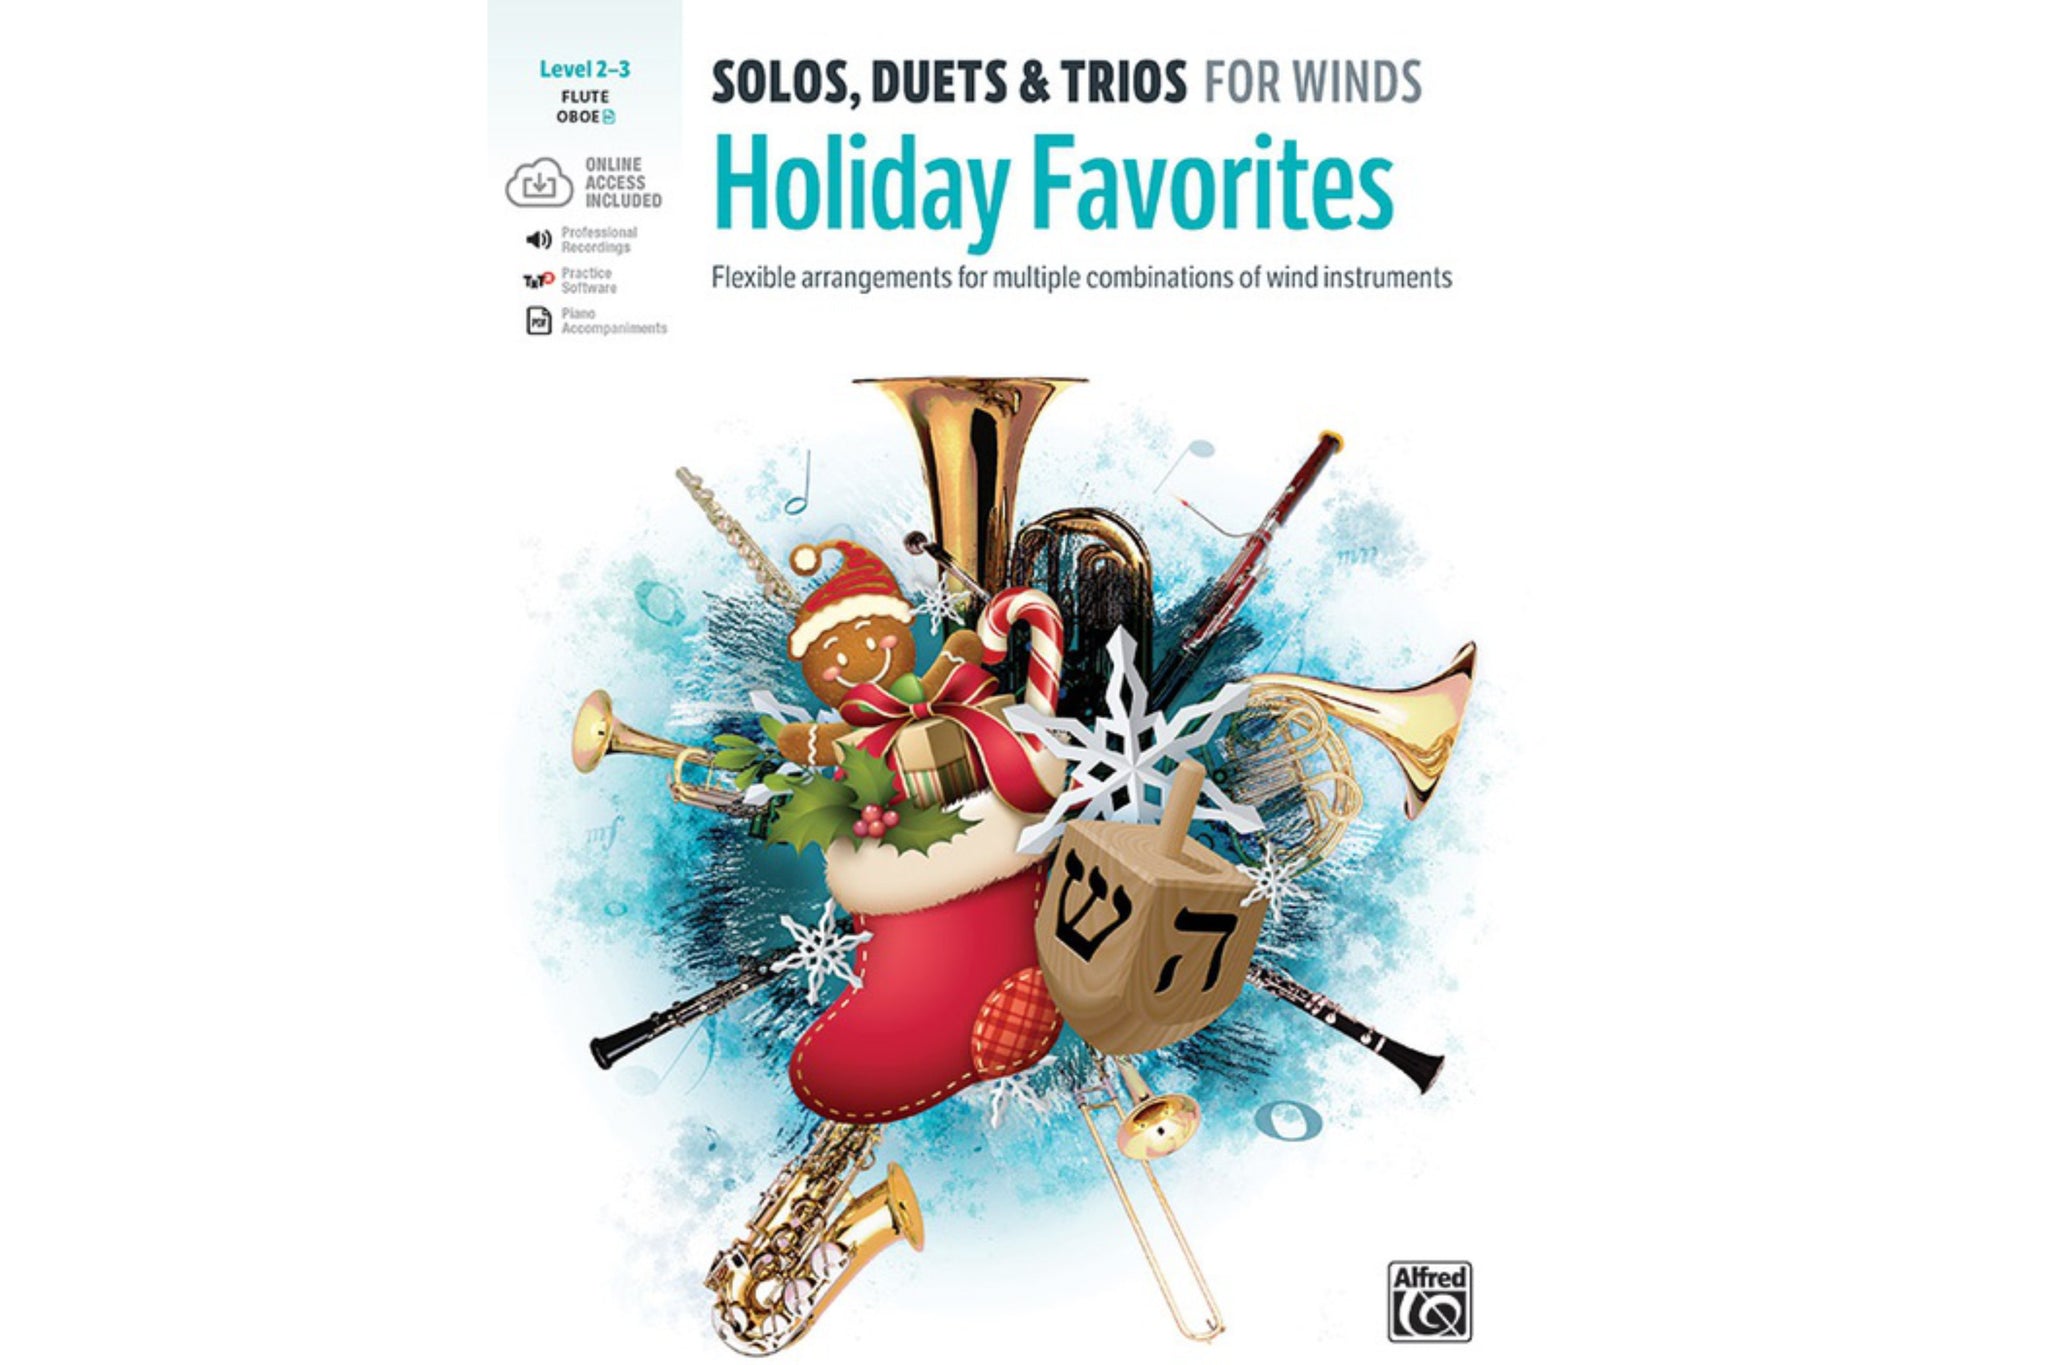 SOLOS, DUETS & TRIOS FOR WINDS: HOLIDAY FAVORITES